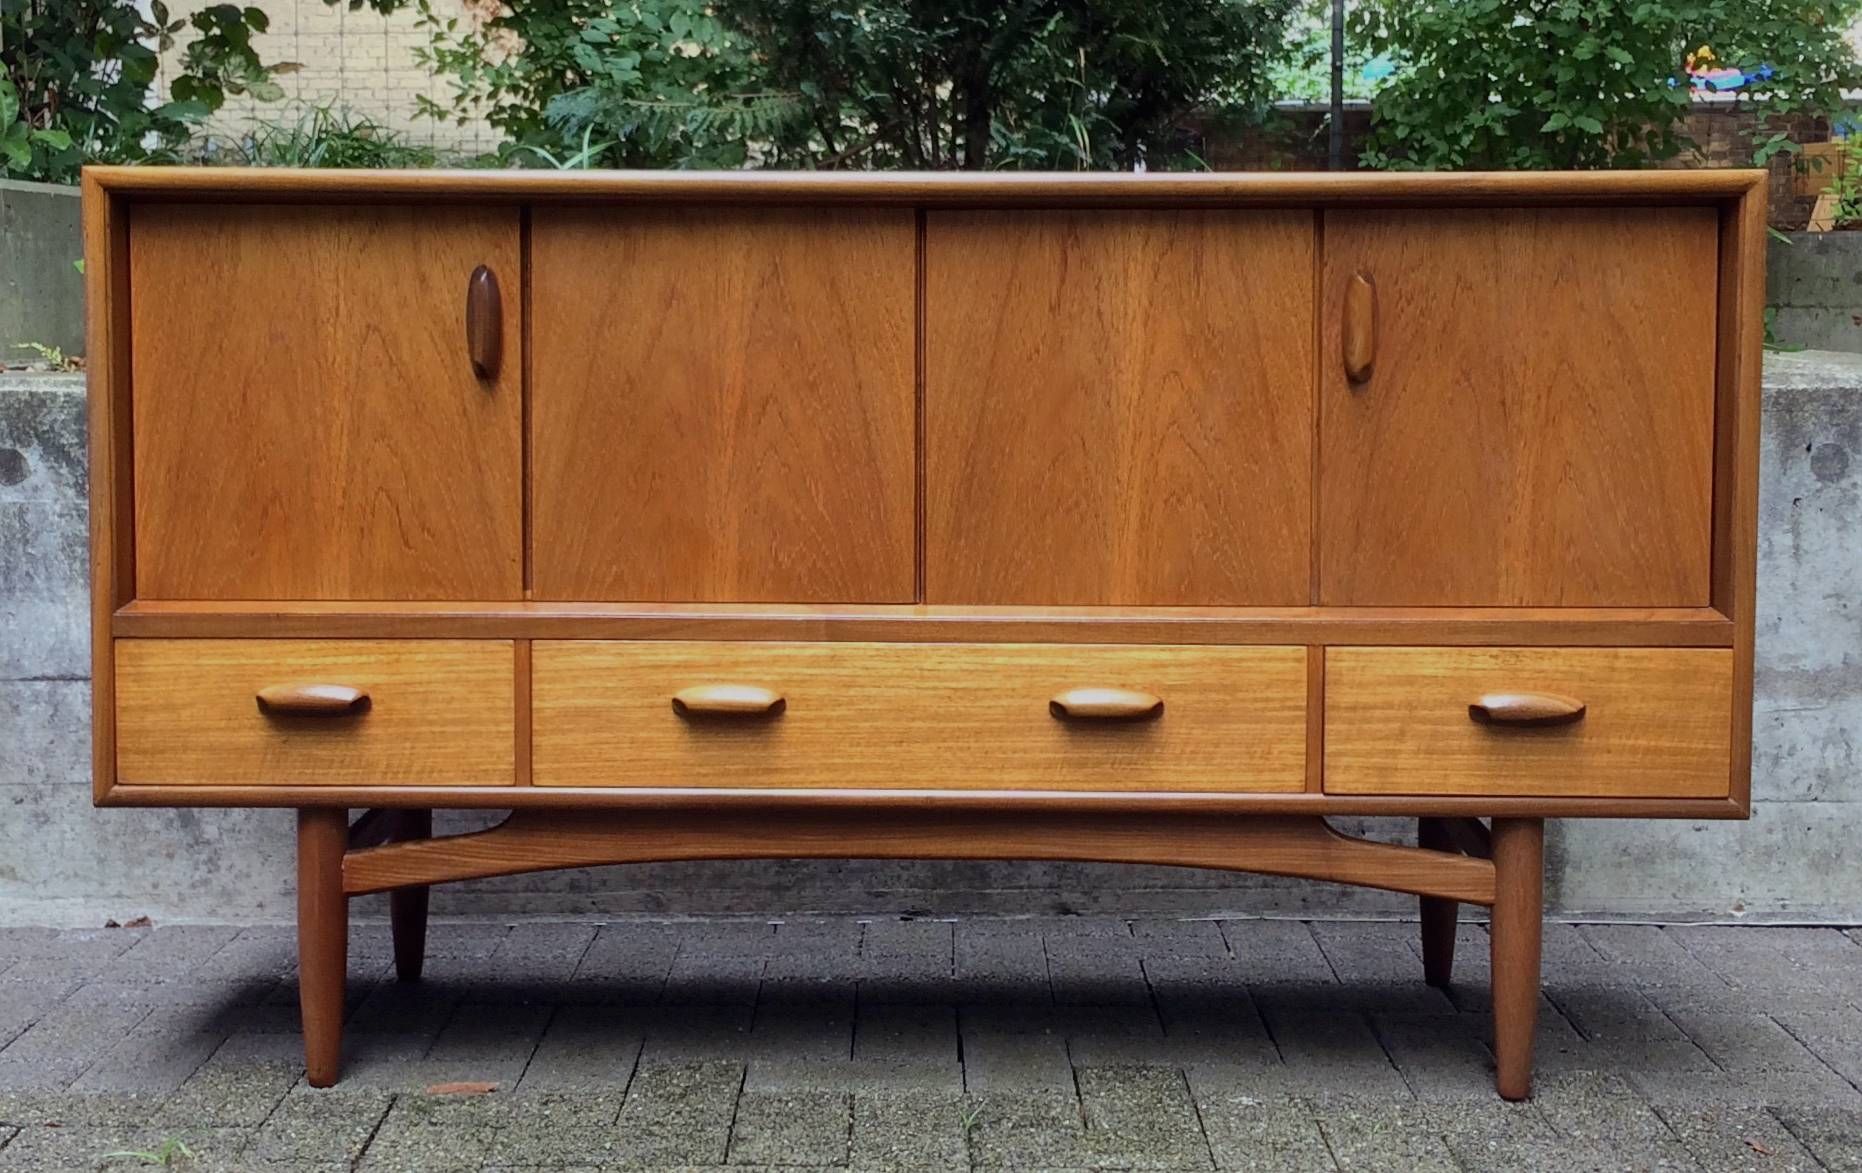 Mid Century Teak Sideboard From The Brasilia Range From G Plan Regarding Most Up To Date G Plan Sideboards (View 12 of 15)